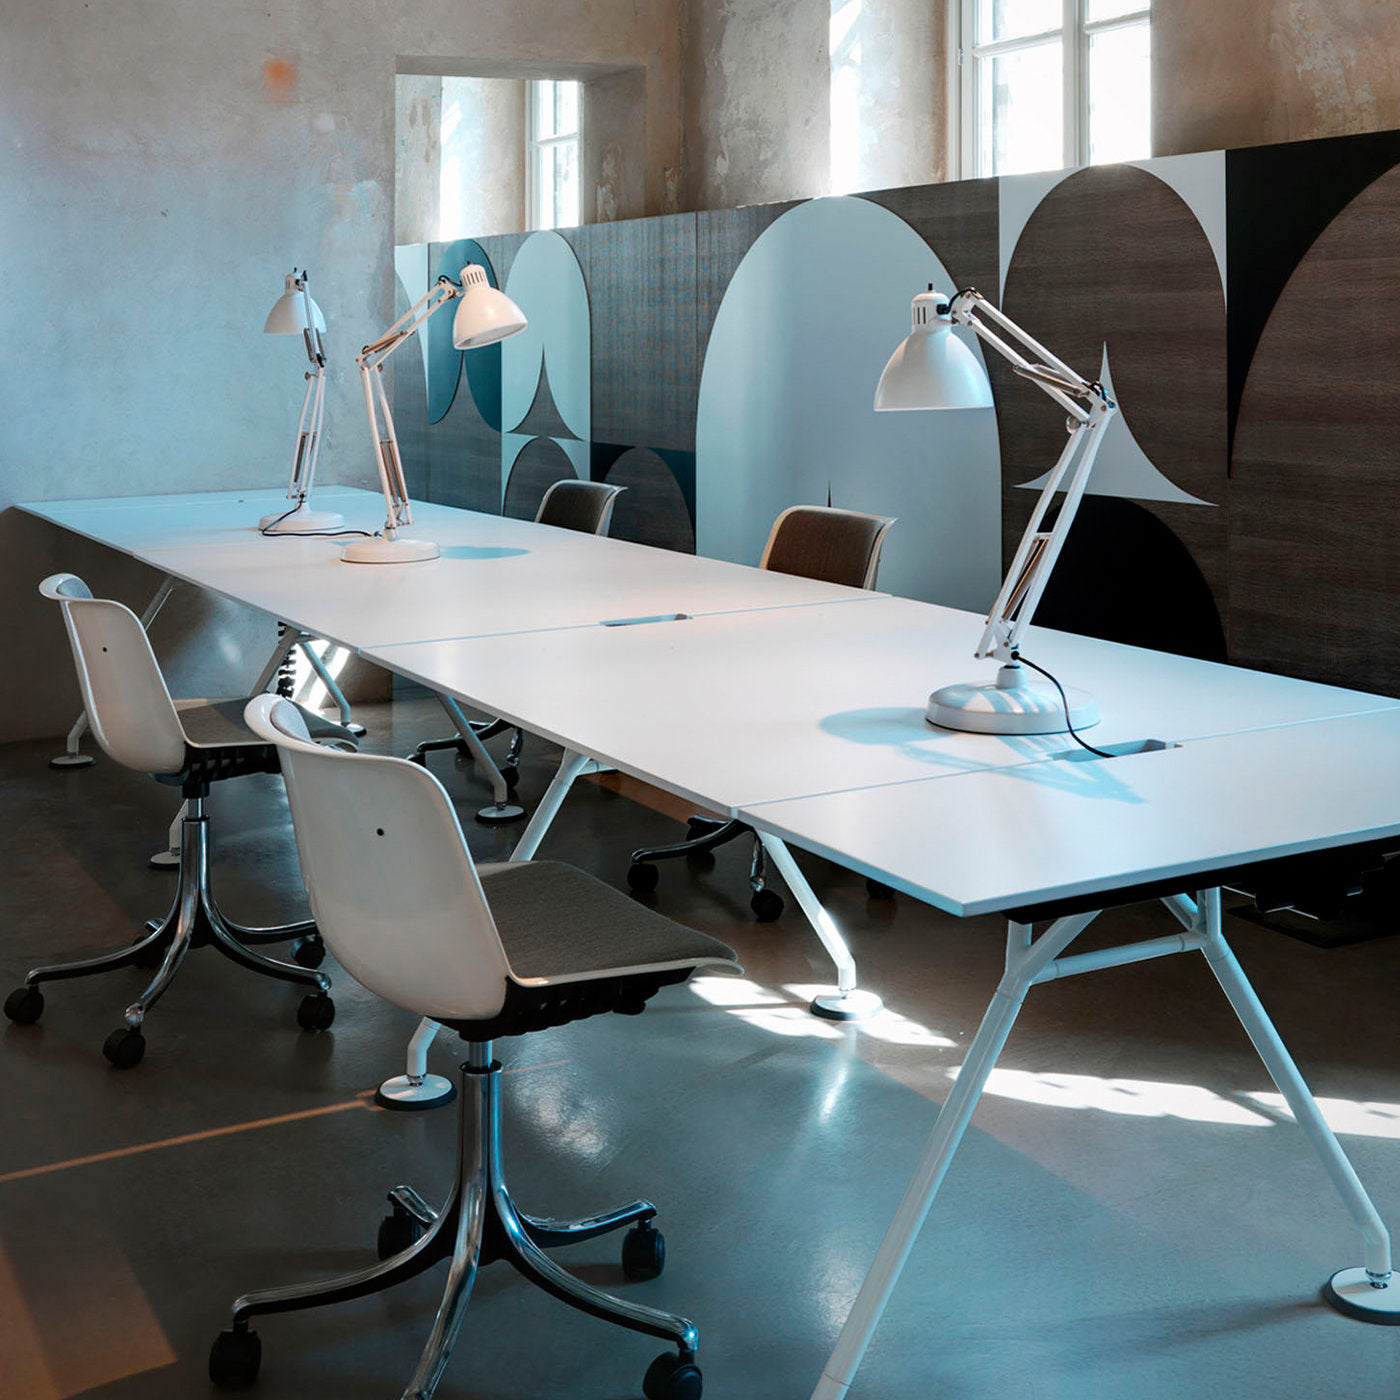 Modus White Chair with Gray Seat Cushion by Centro Progetti Tecno - Alternative view 4